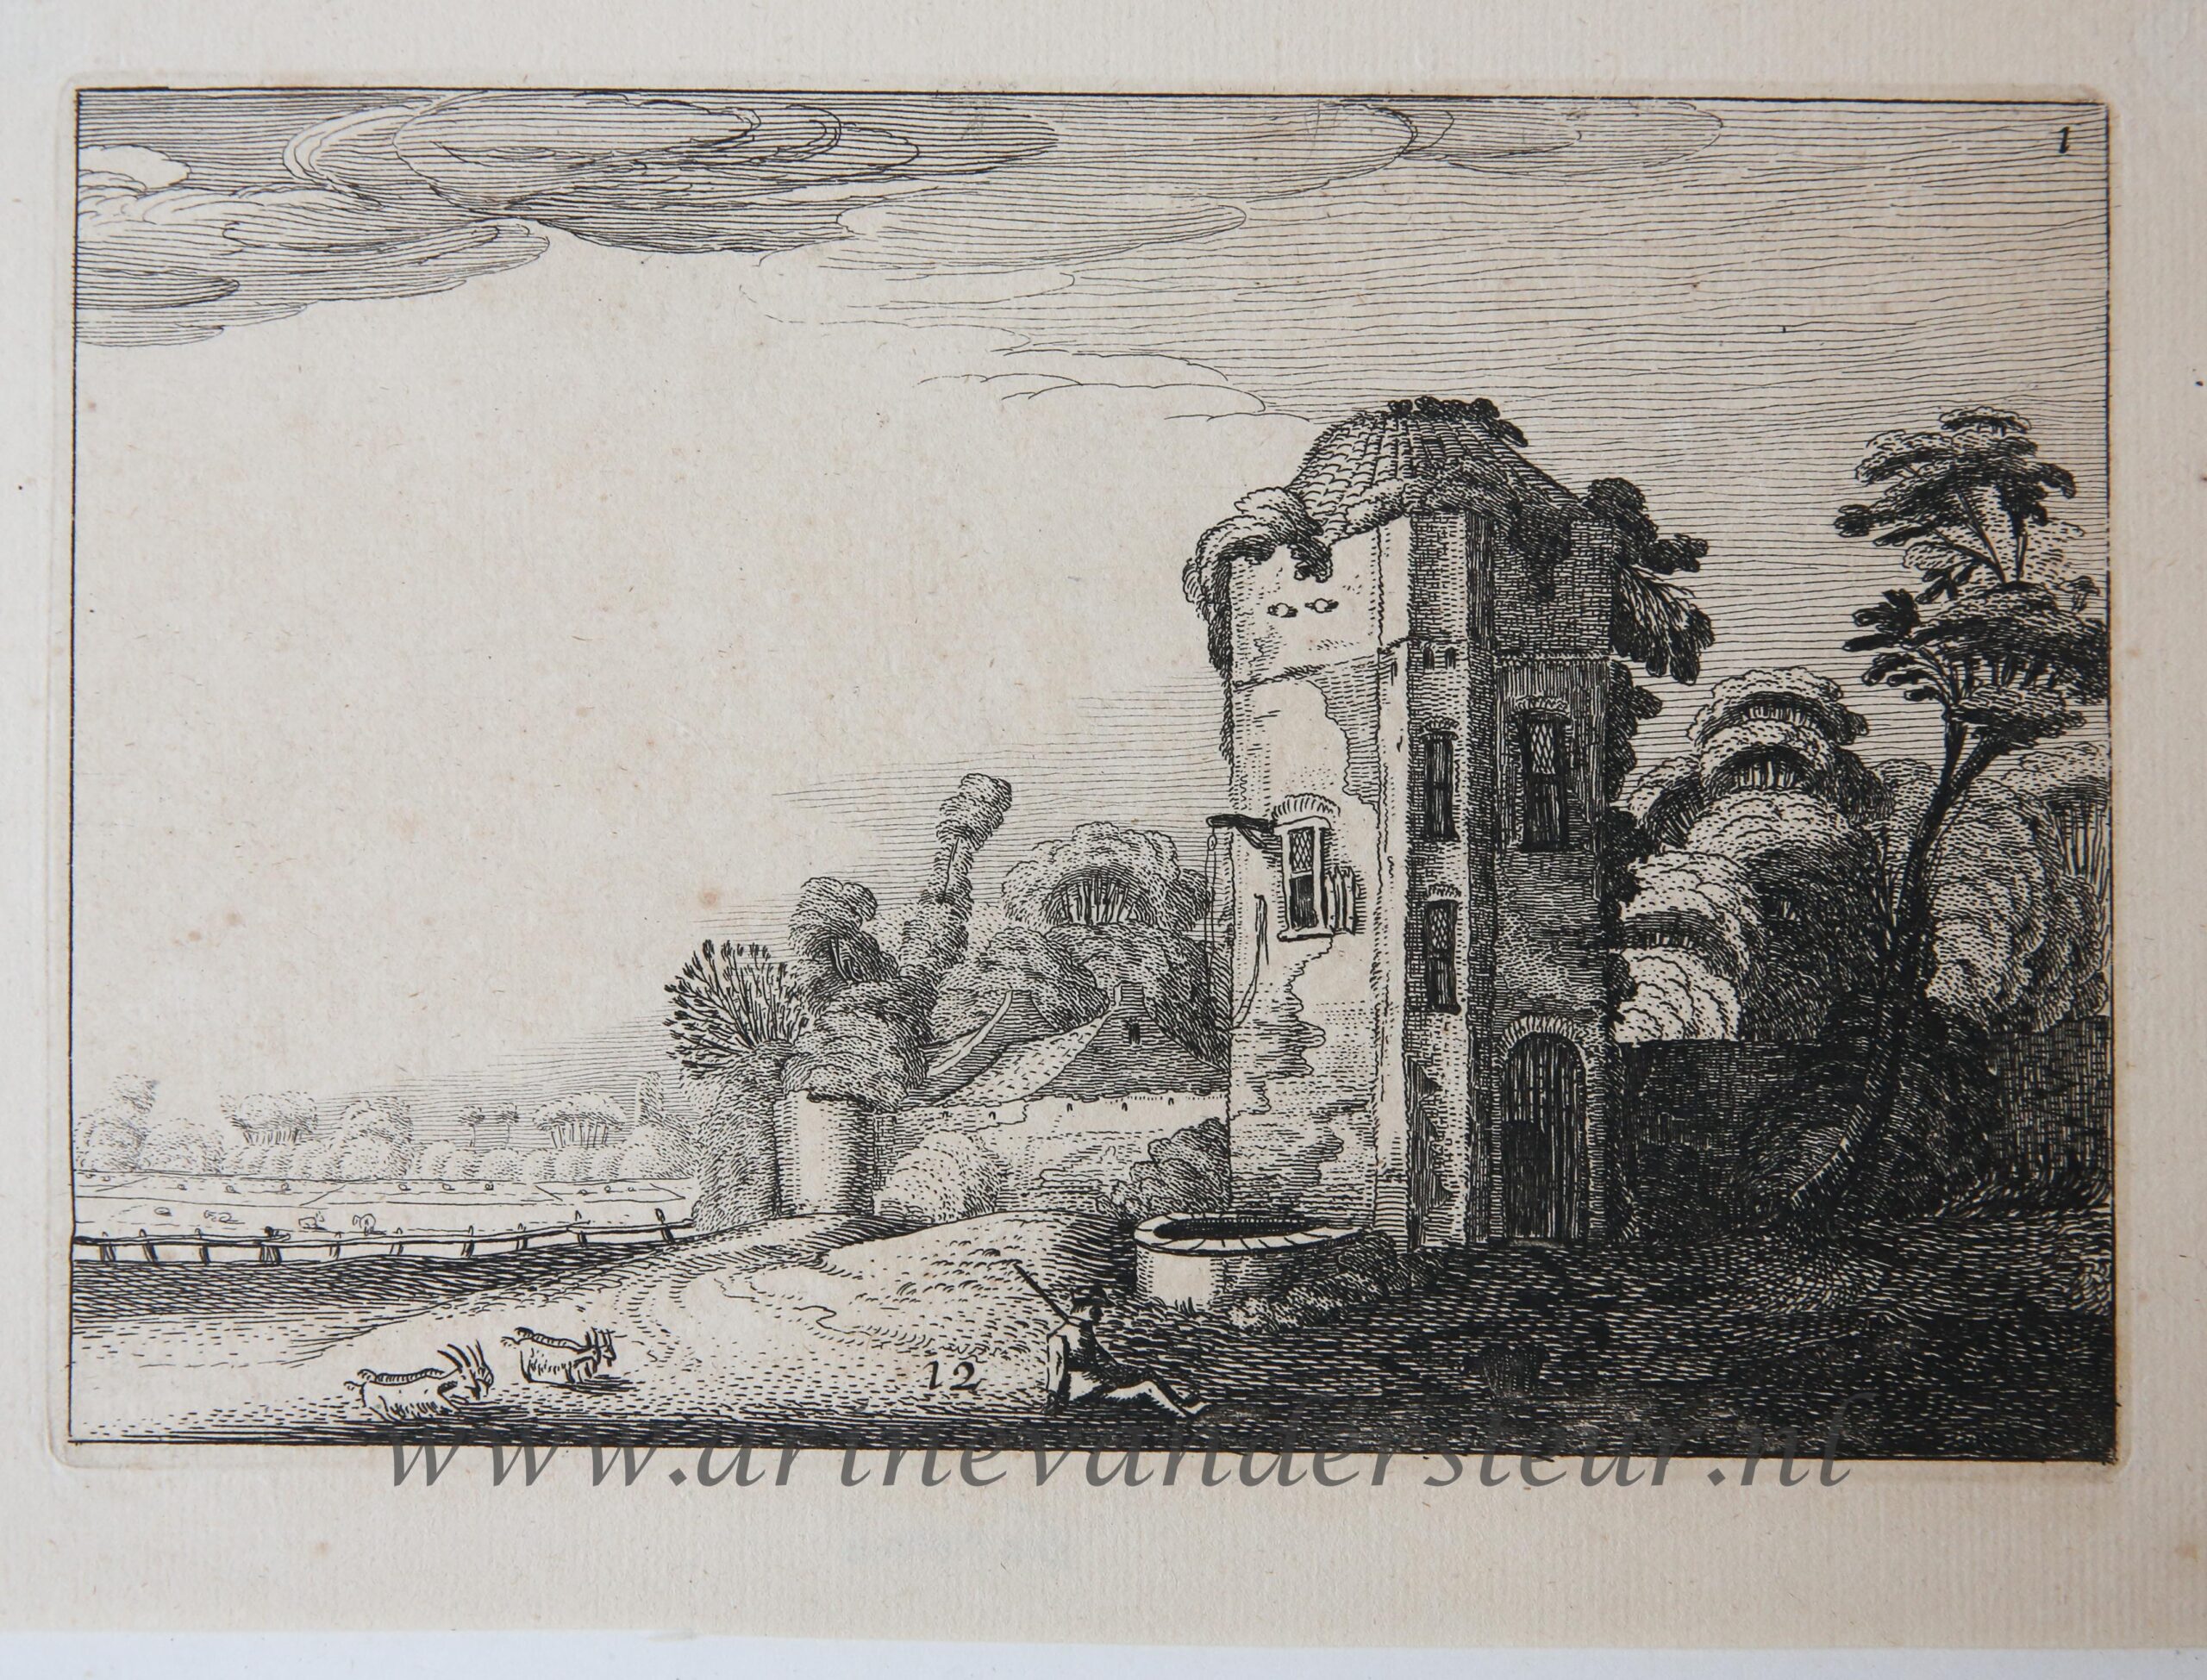 [Antique etching, ets, landscape print] J. v.d. Velde II, Shepherd at a tower with a well, published before 1713.